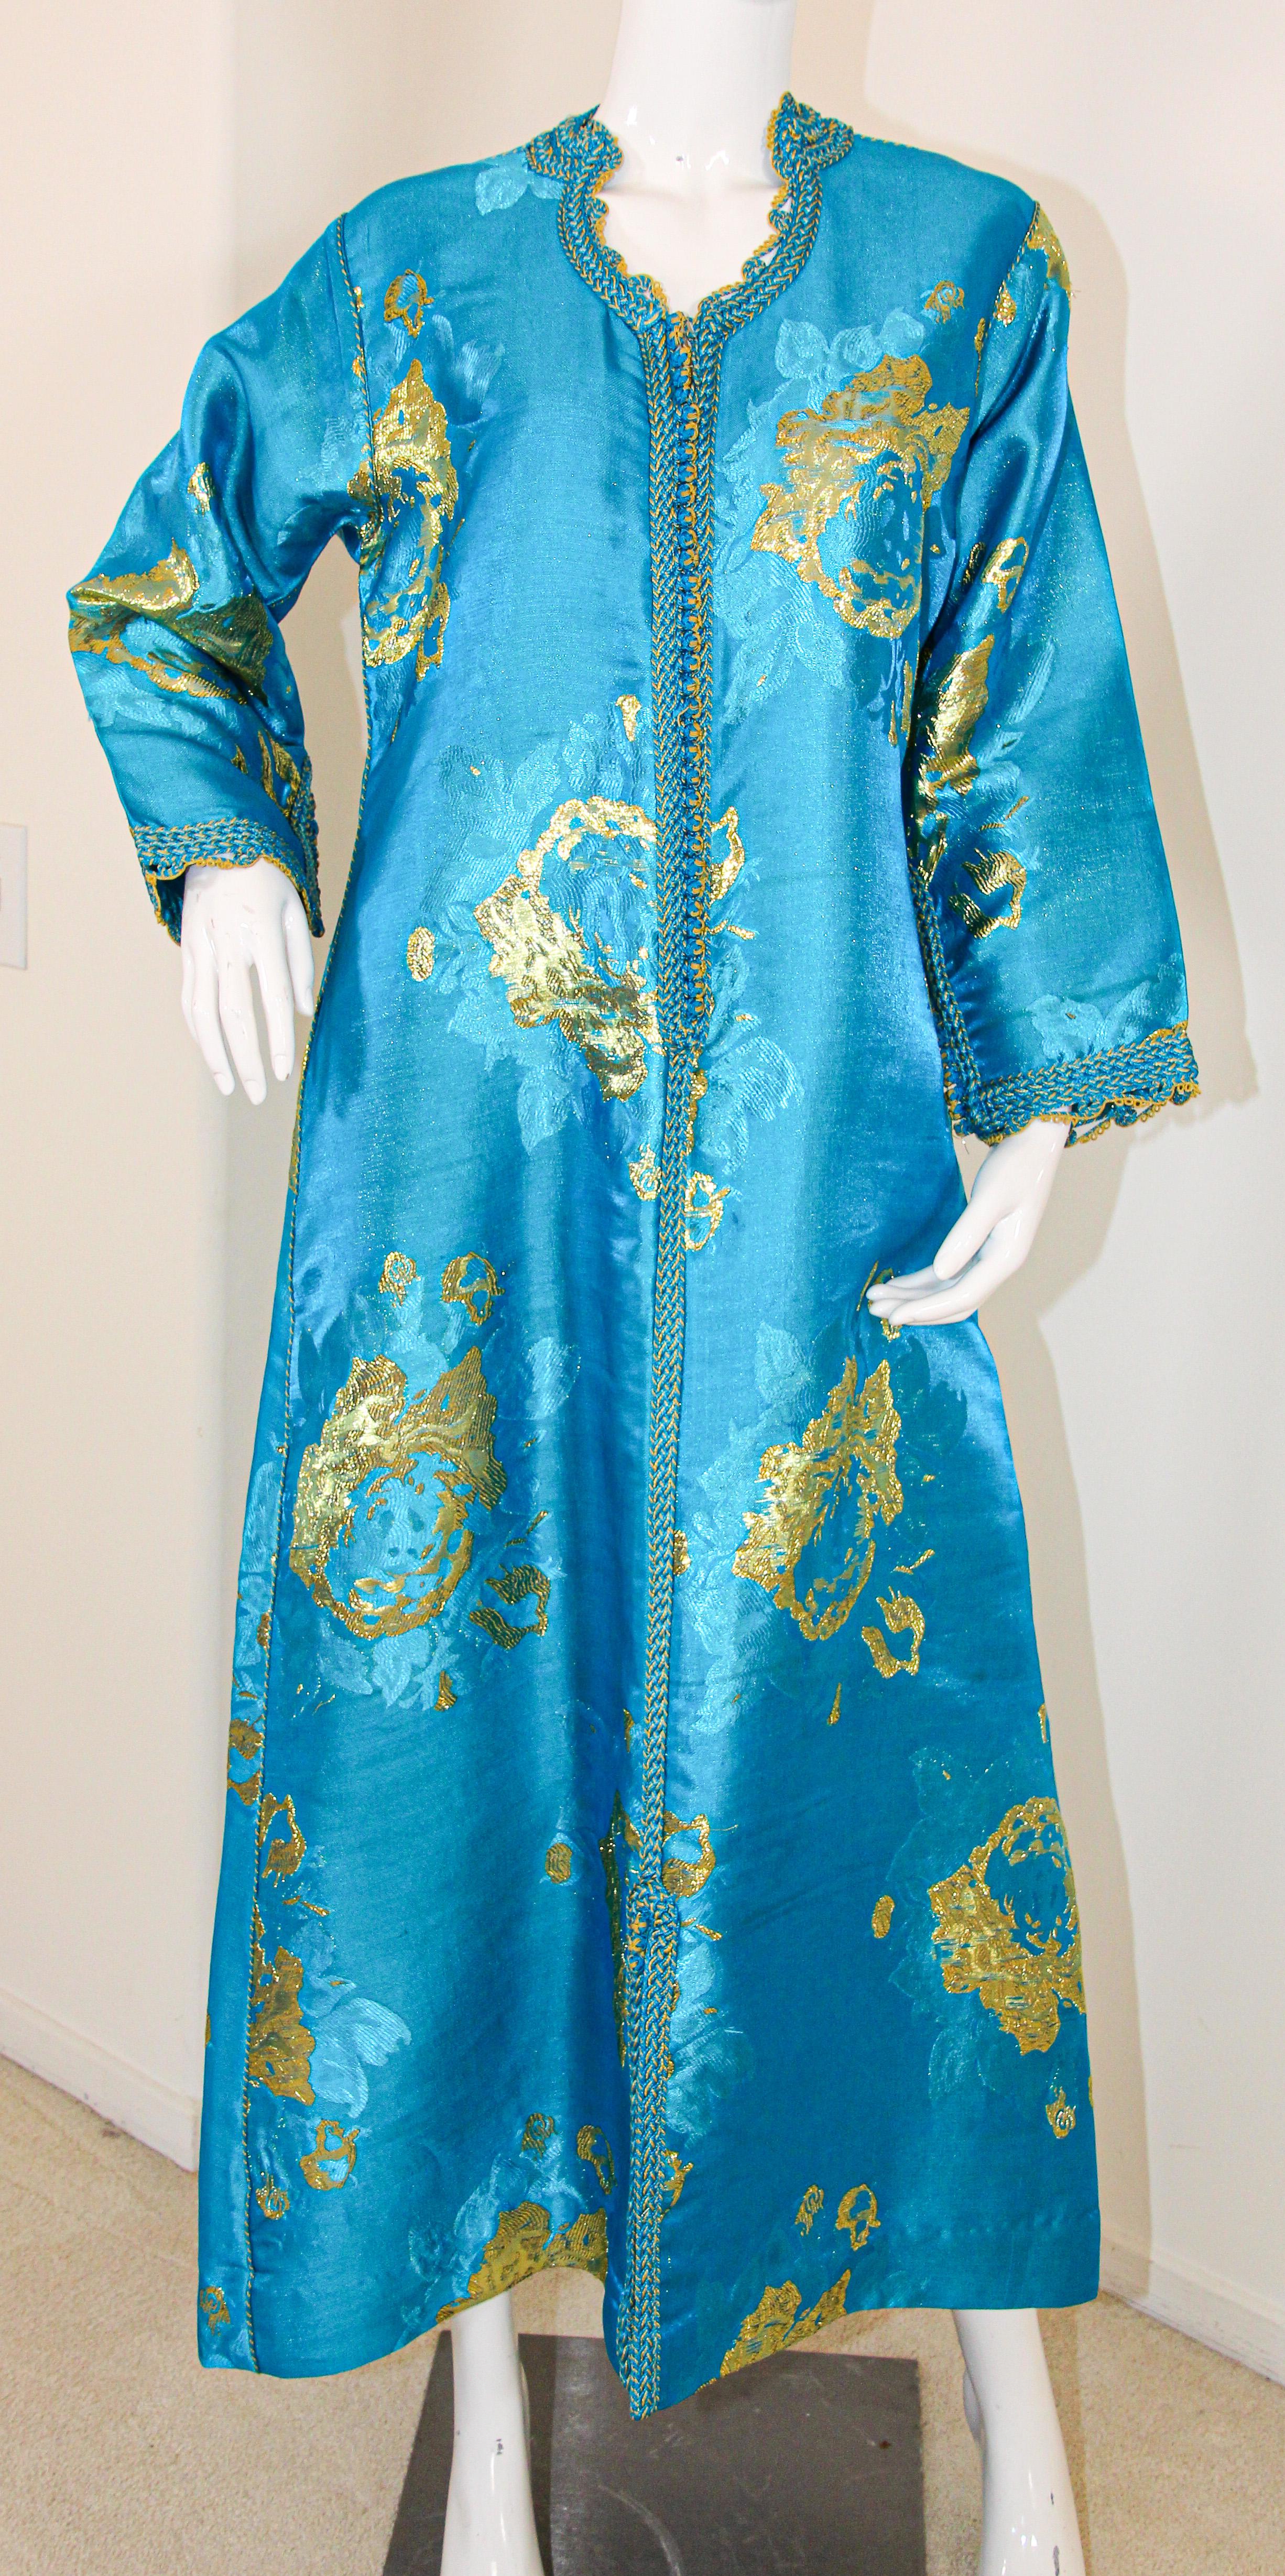 Moroccan Vintage Kaftan in Turquoise and Gold Floral Brocade Metallic Lame 9